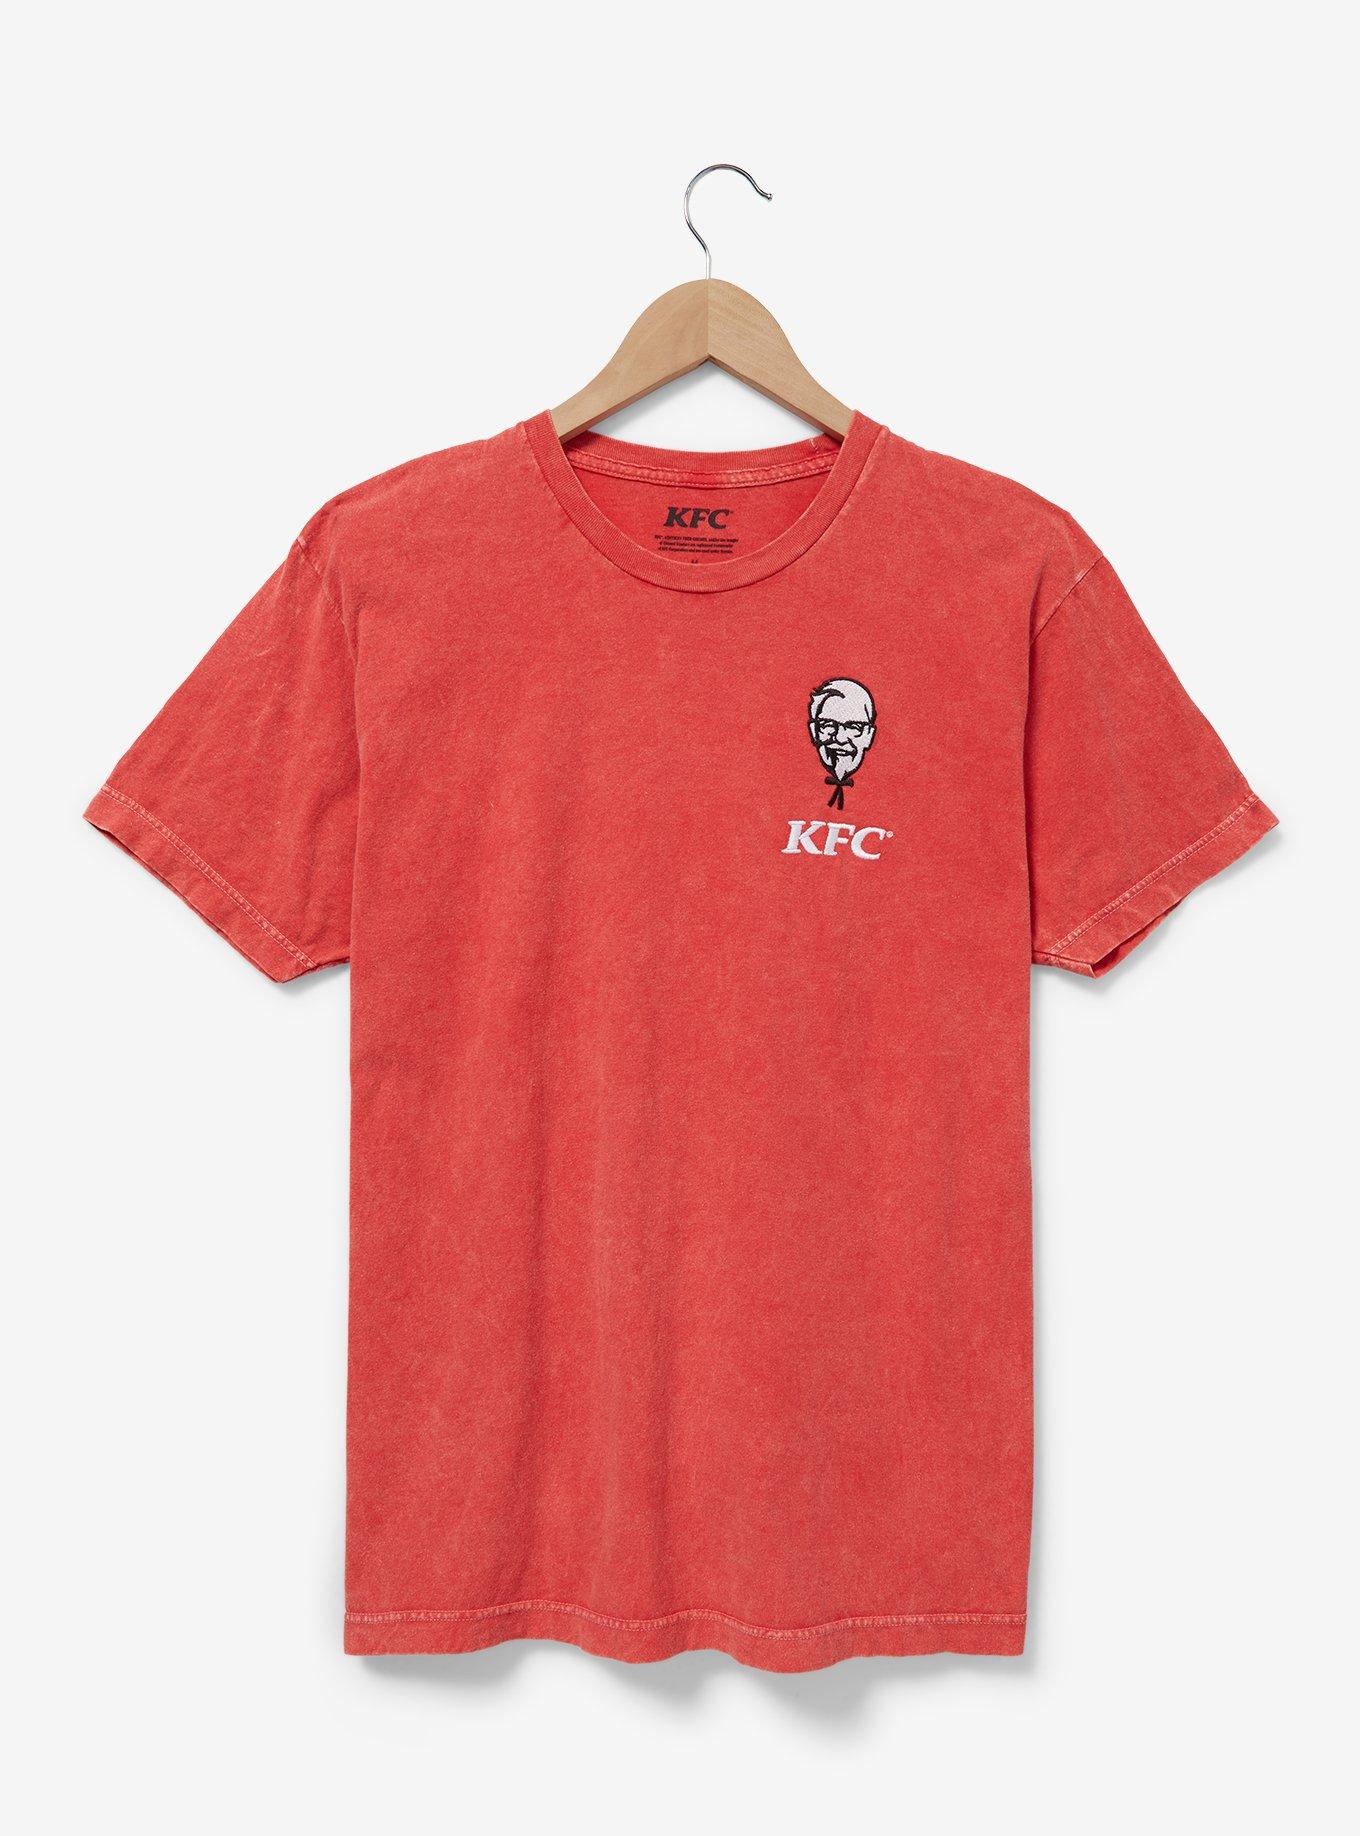 KFC Colonel Sanders Embroidered Portrait T-Shirt - BoxLunch Exclusive, RED, hi-res